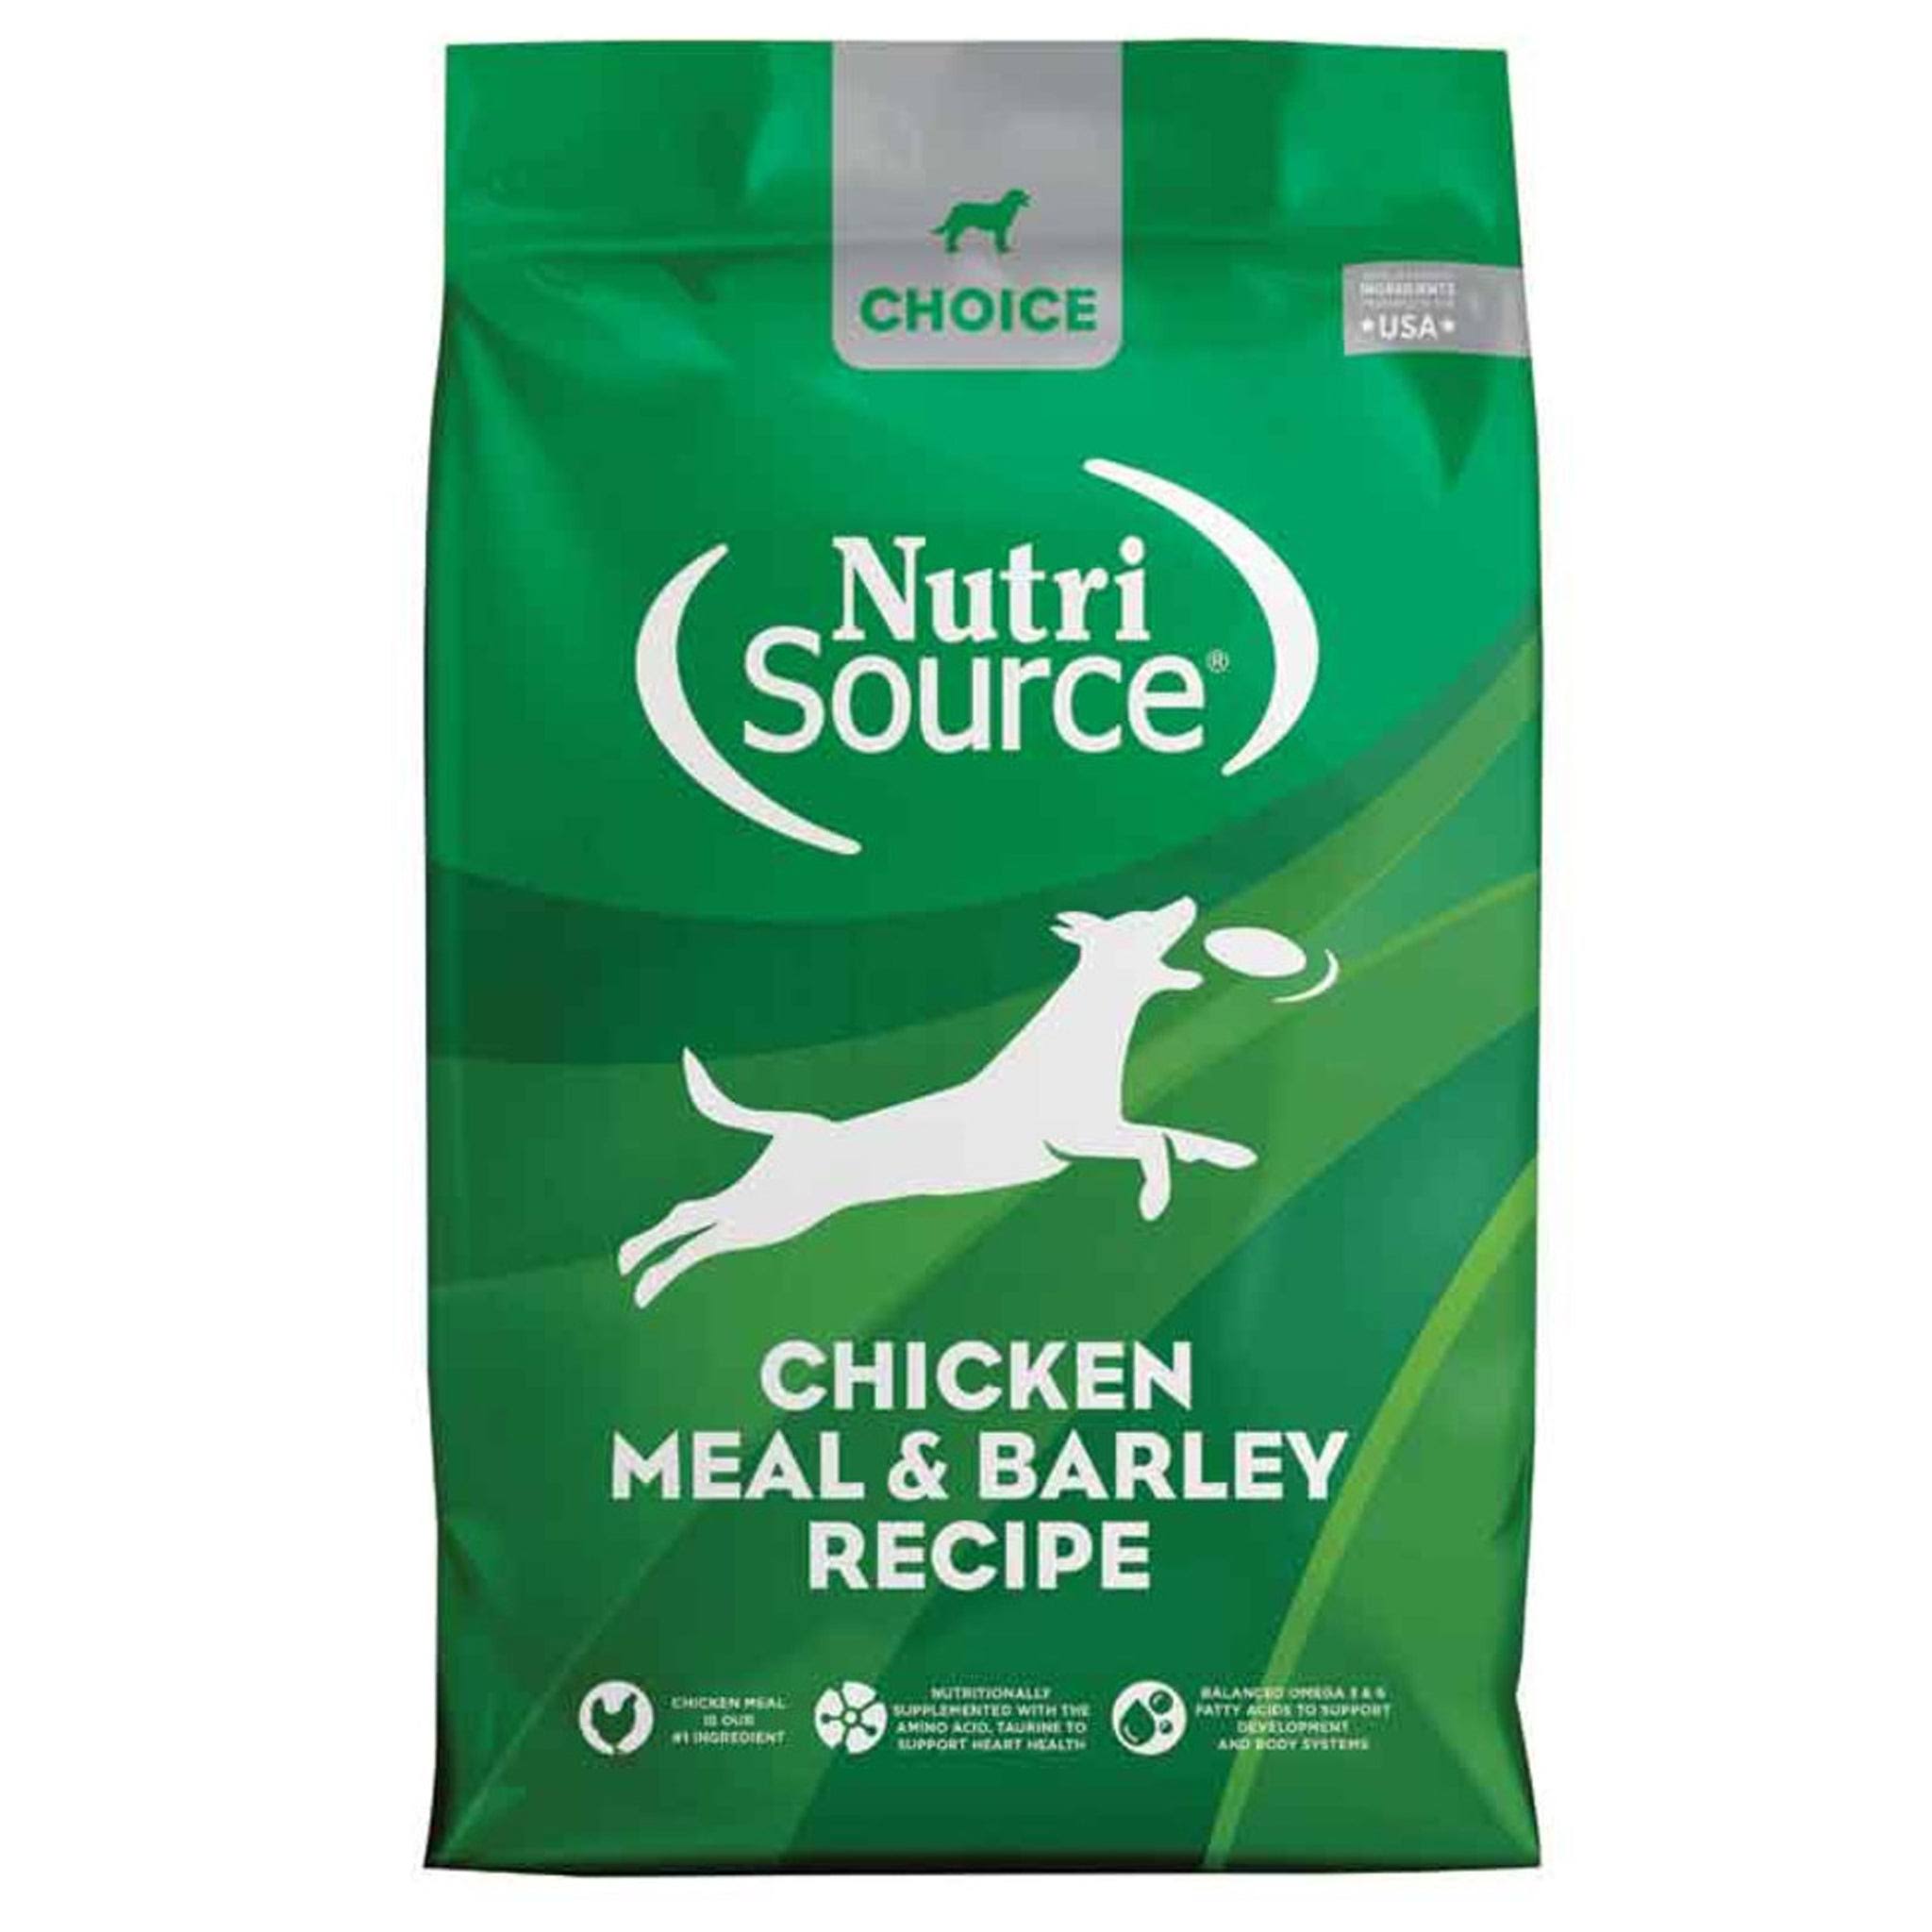 NutriSource Choice Chicken Meal & Barley Recipe Dry Dog Food, 30-lb